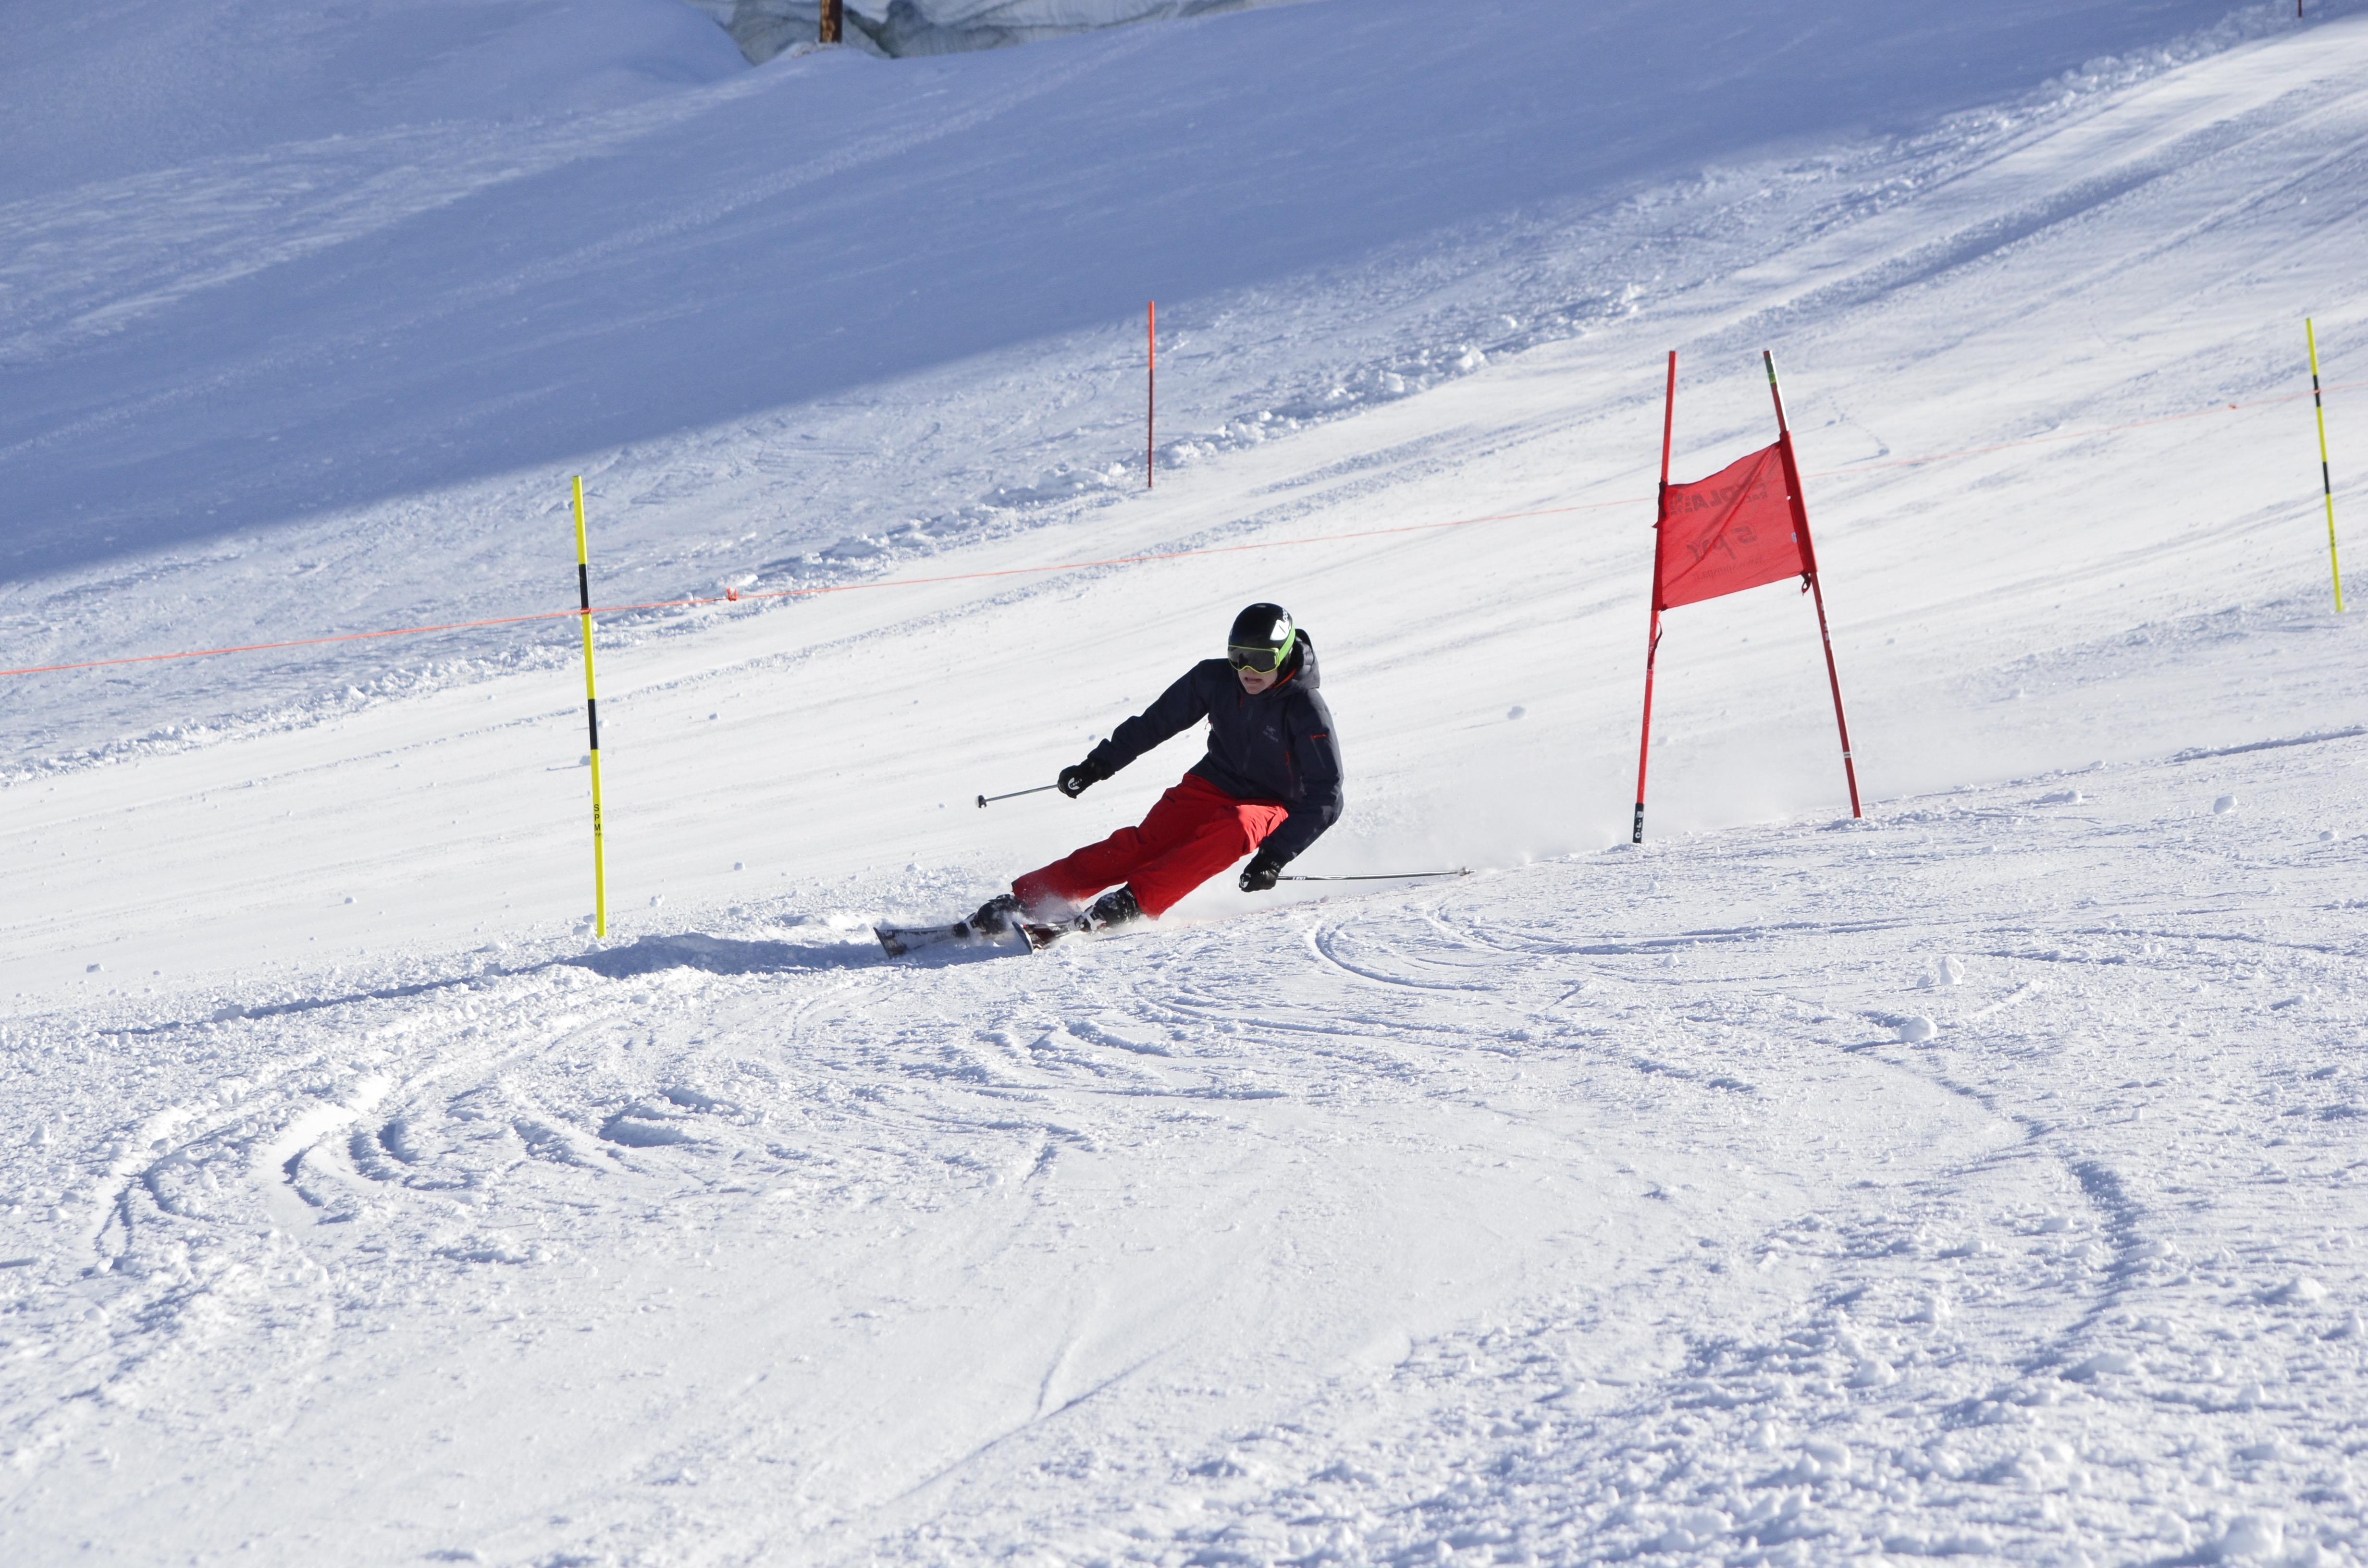 FIRST TURNS TO LAST TURNS: 10 WEEK SKI INSTRUCTOR COURSE